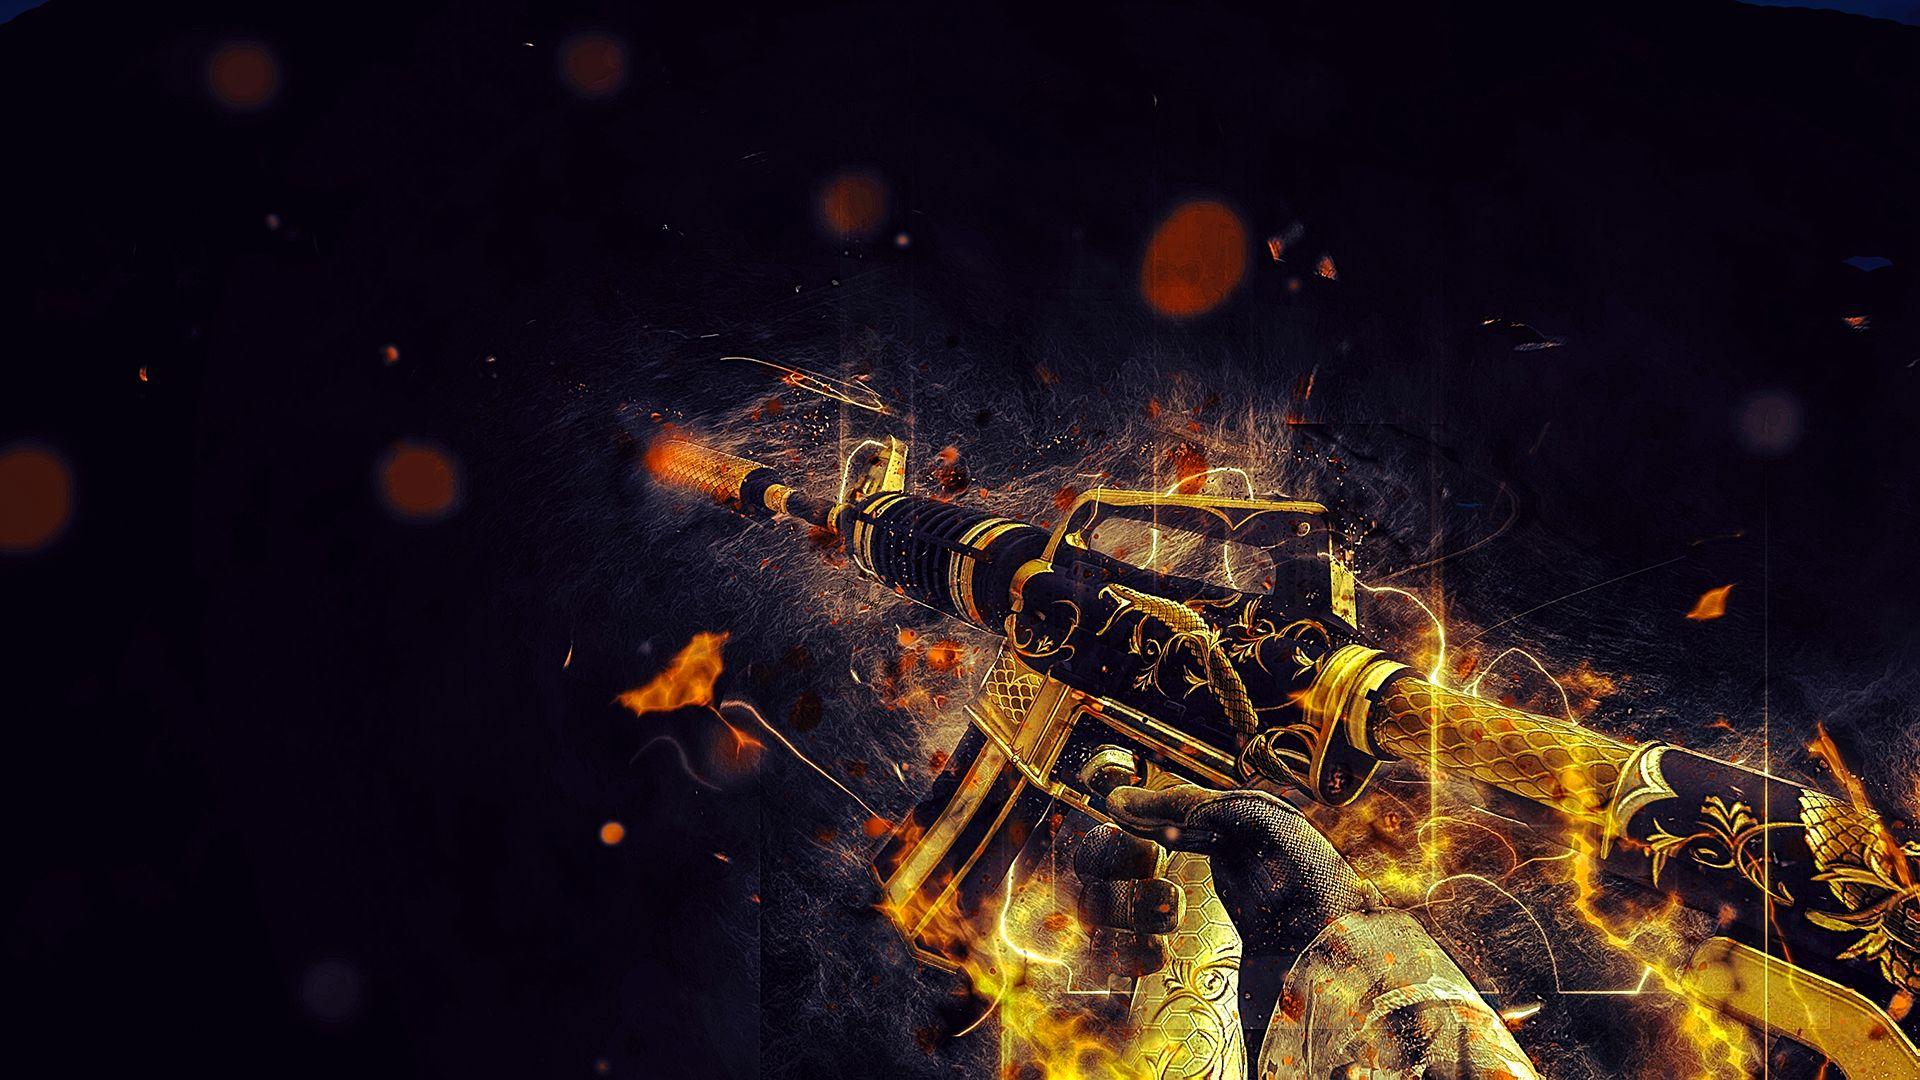 M4A1 S. Golden Coil. CS:GO Wallpaper And Background